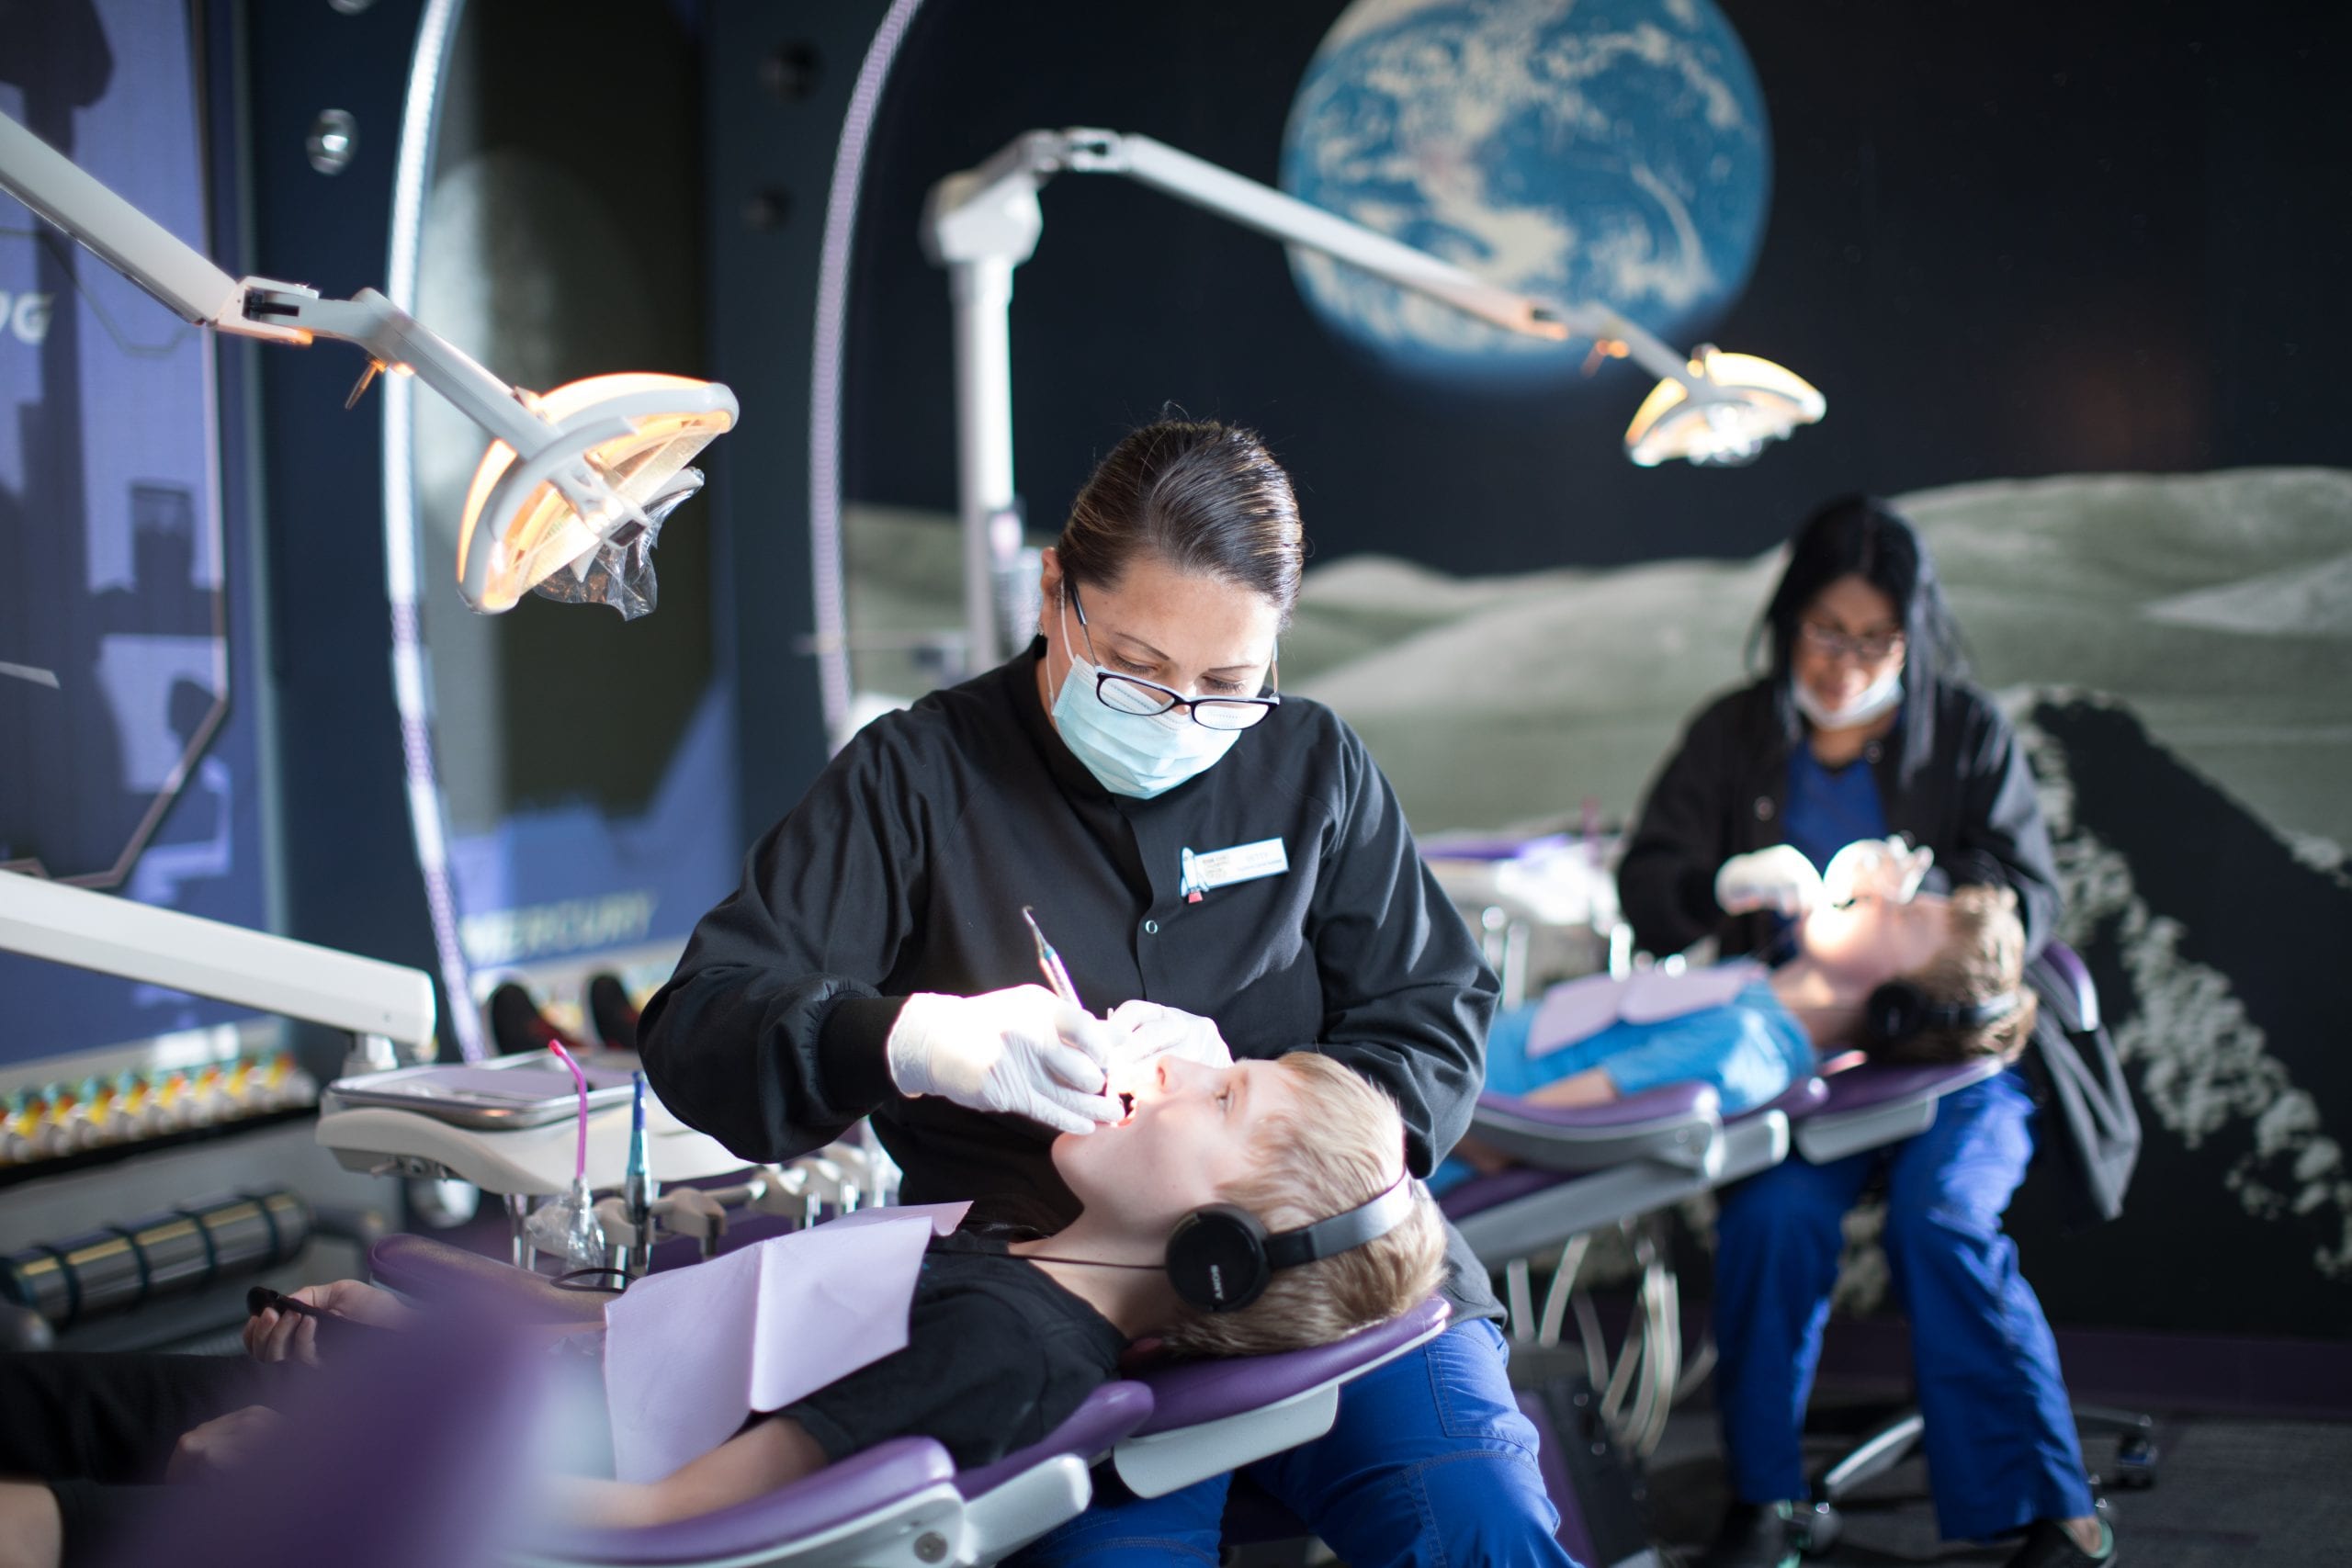 'Childrens Dental Group' Hygienist Cleaning Patient